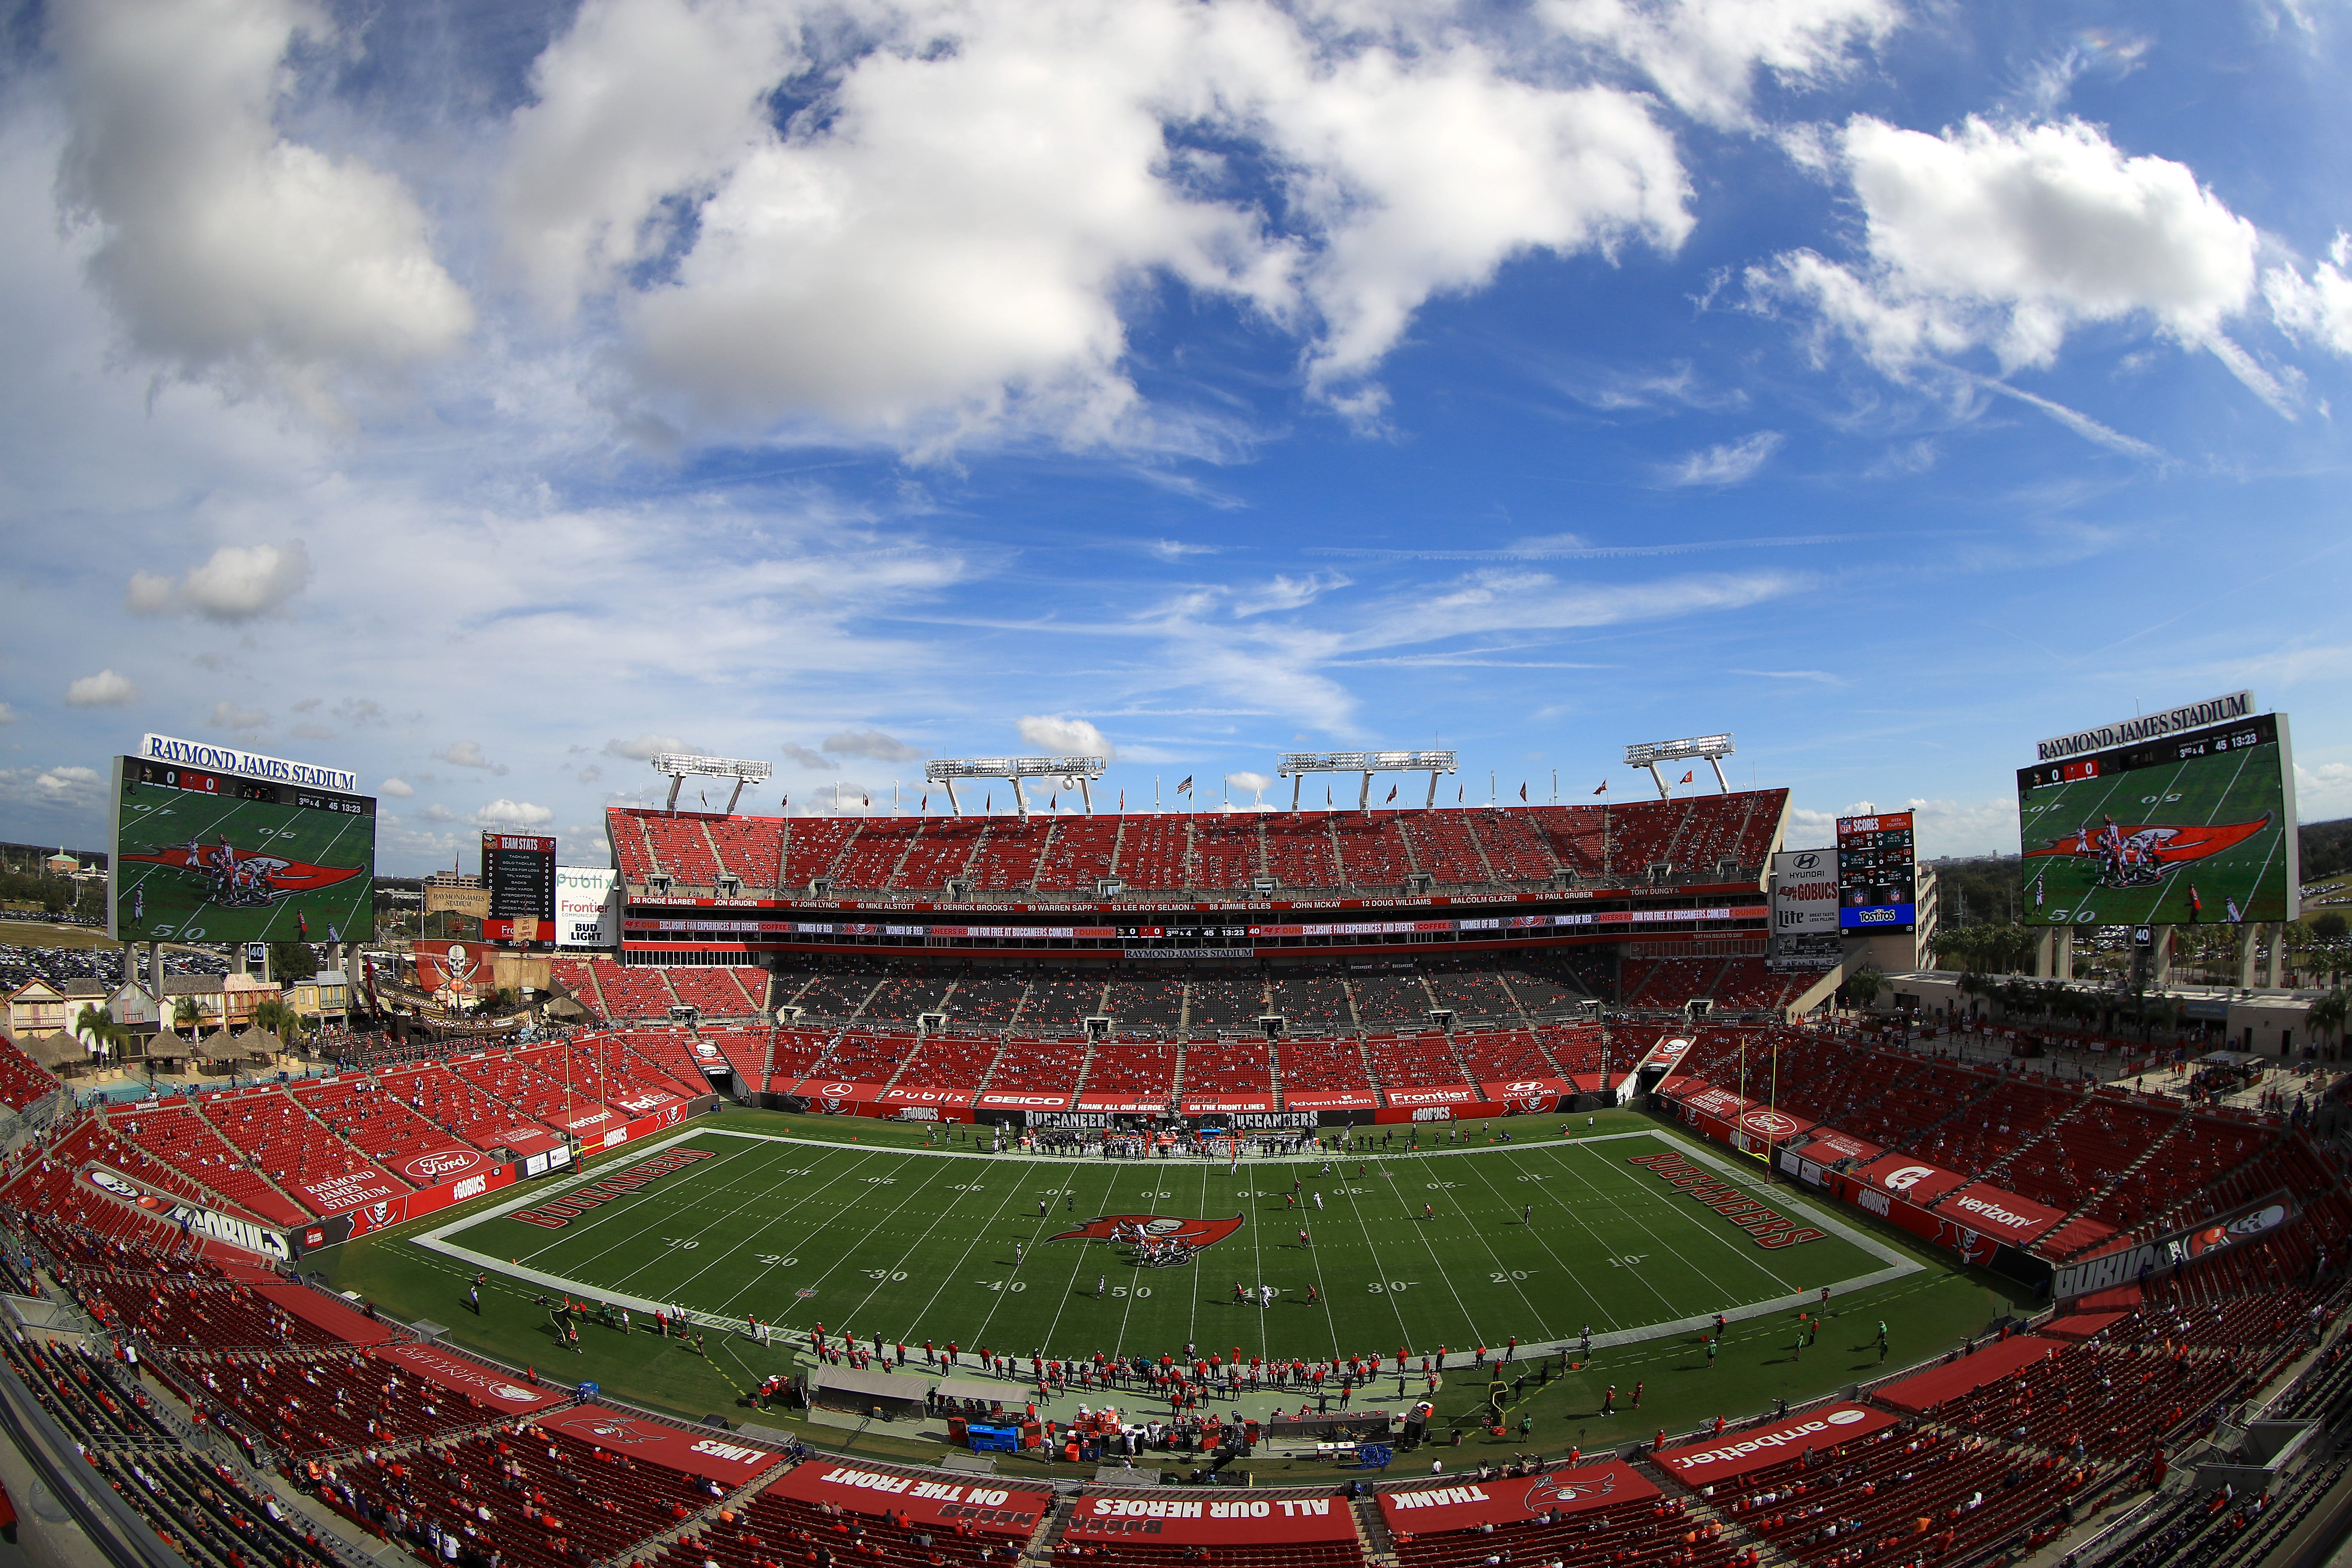 Super Bowl teams won't travel to Tampa until day or two prior to game